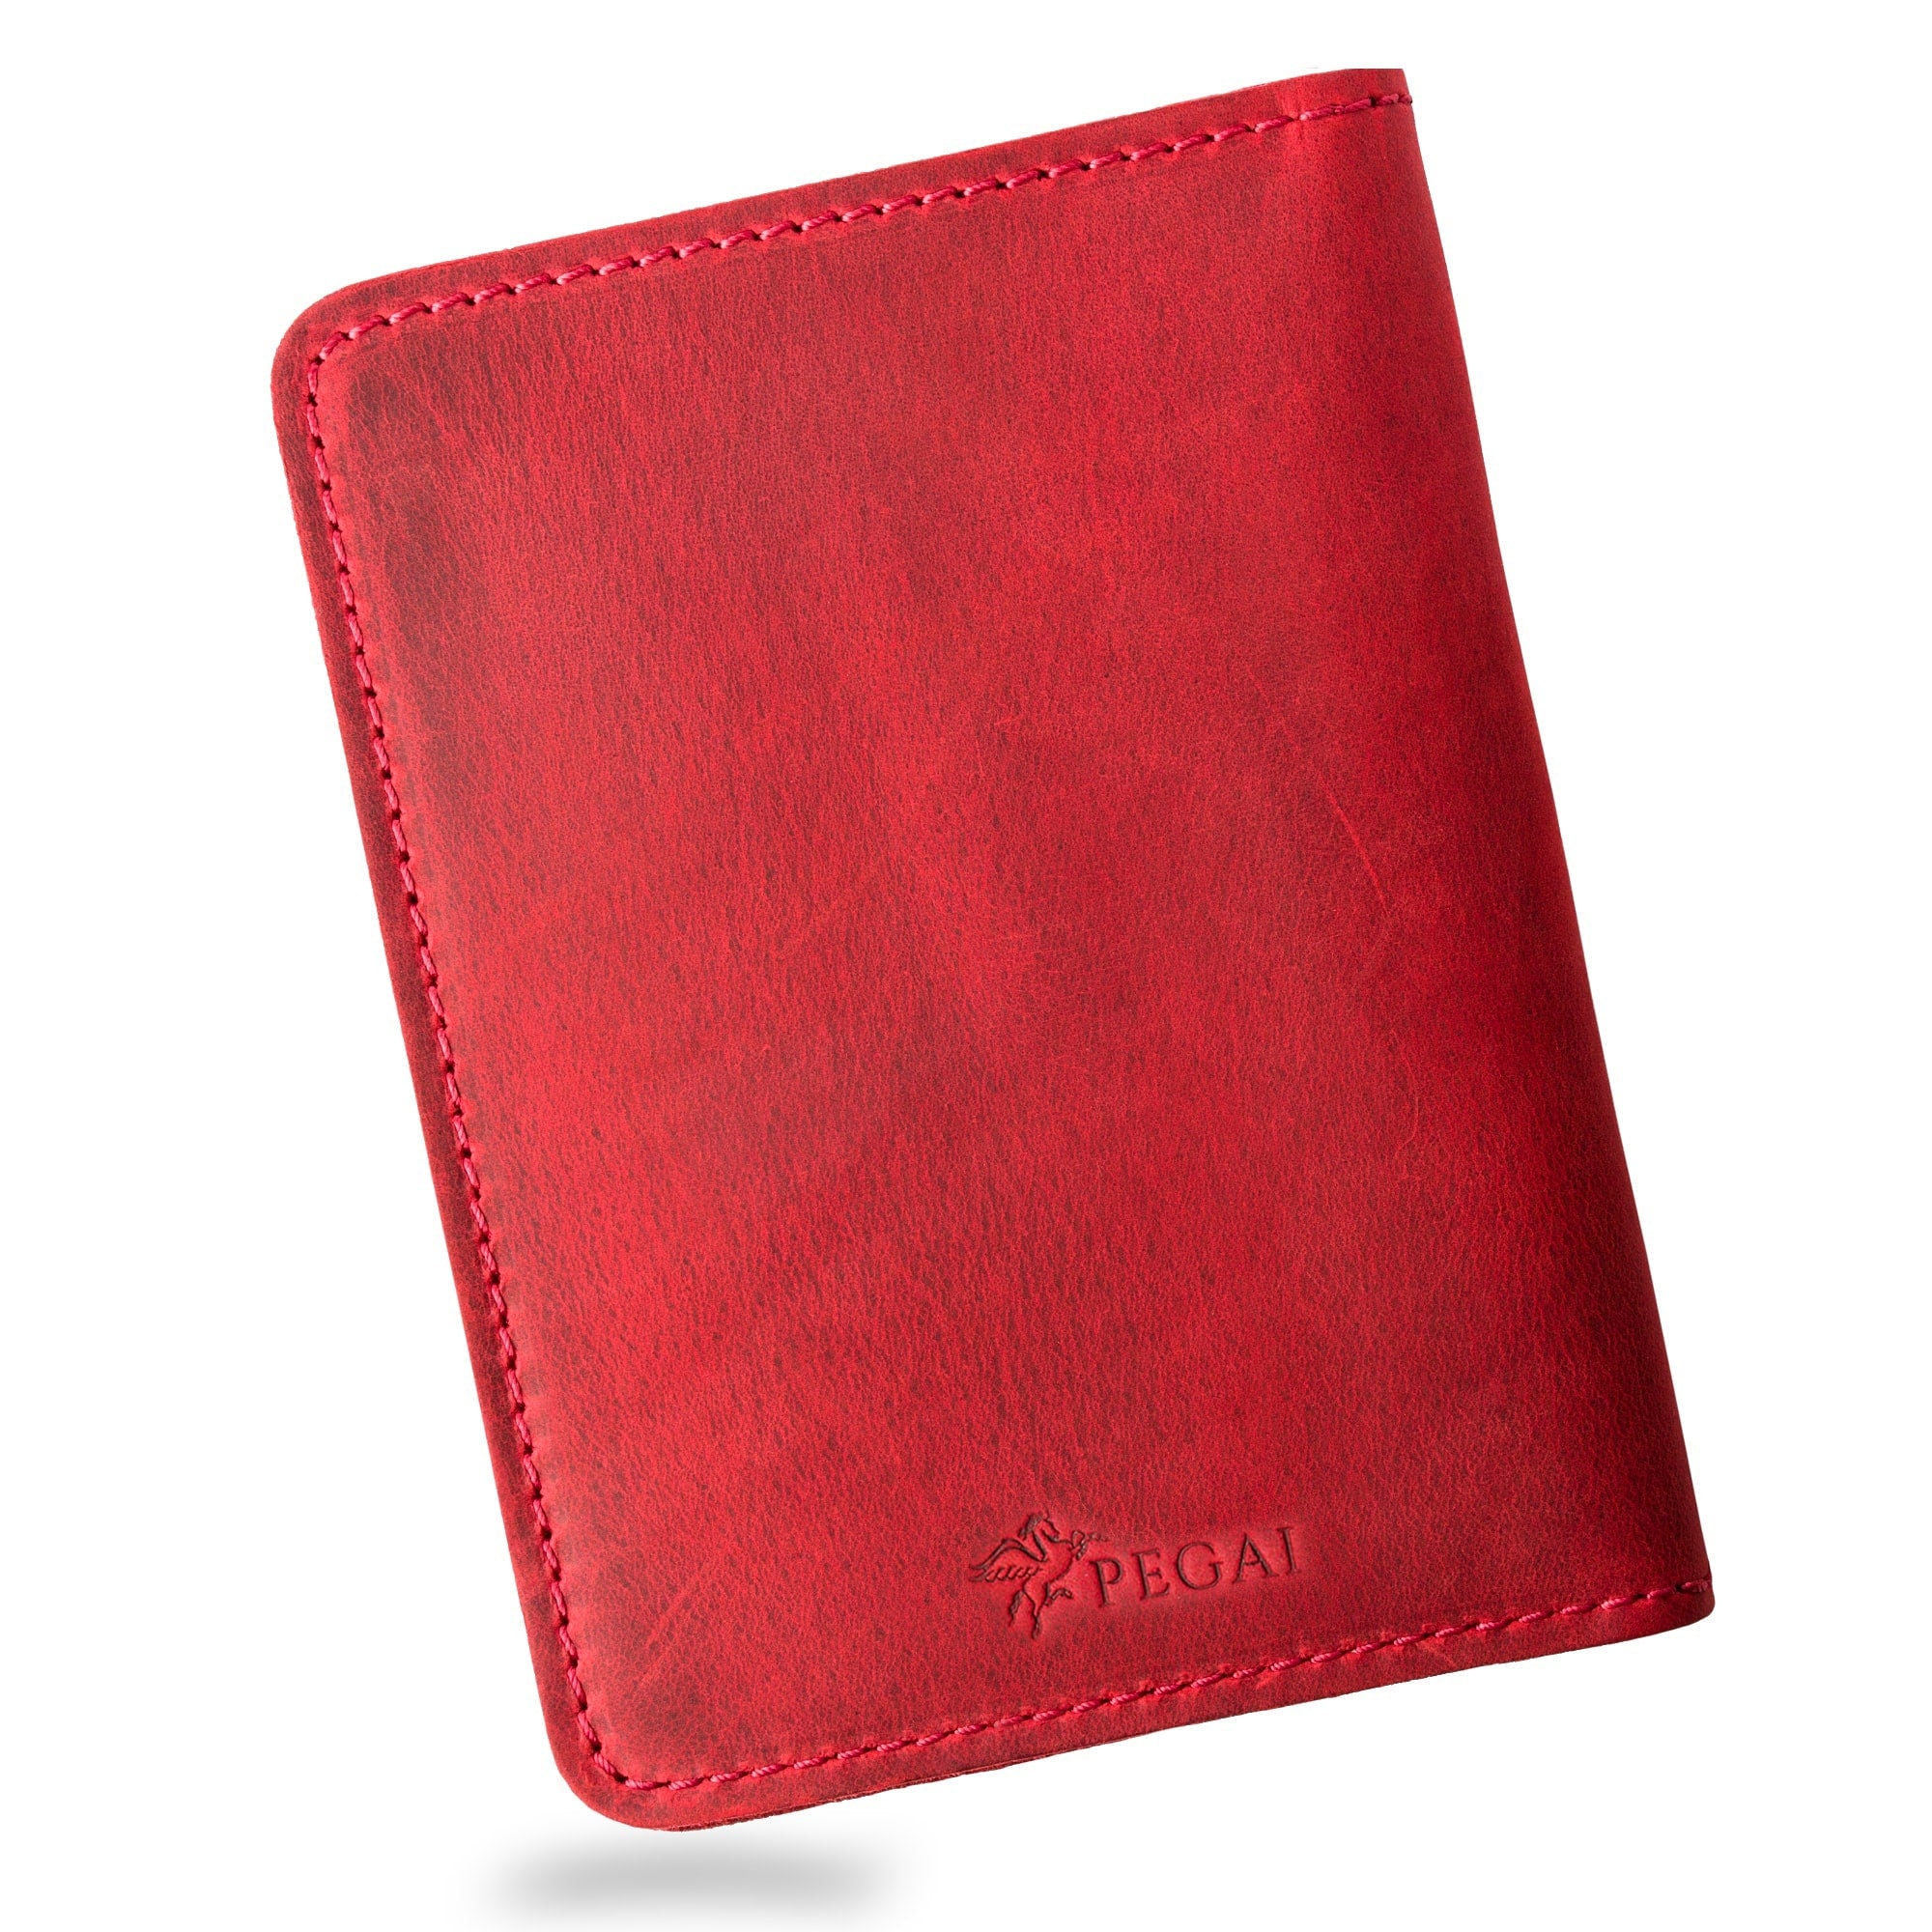 PERSONALIZED Leather Travel Wallet Custom Passport Holder Distressed  Leather Passport Cover Monogrammed Travel Gift for Her Pike-rose Red 